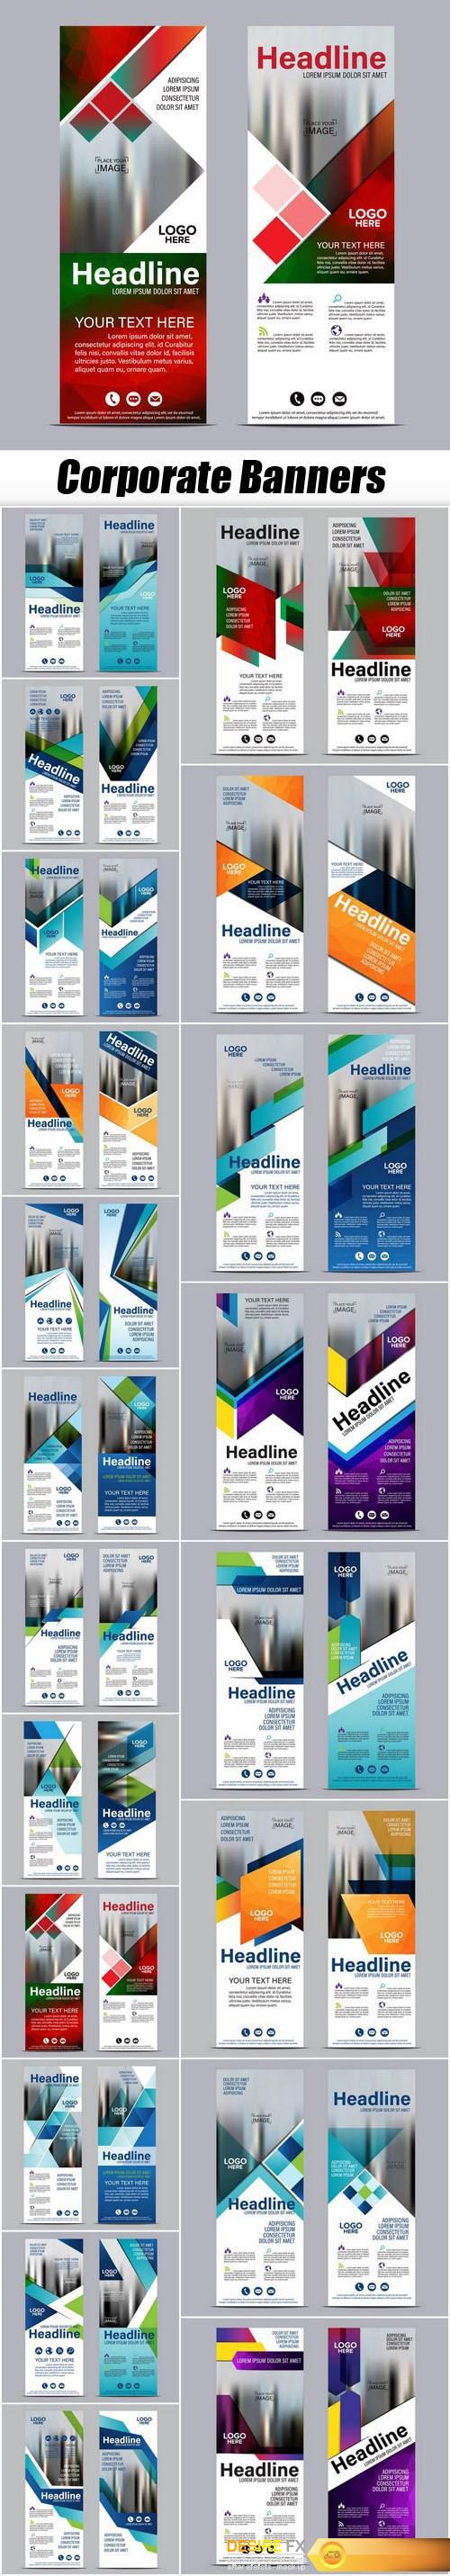 Corporate Banners - 20xEPS